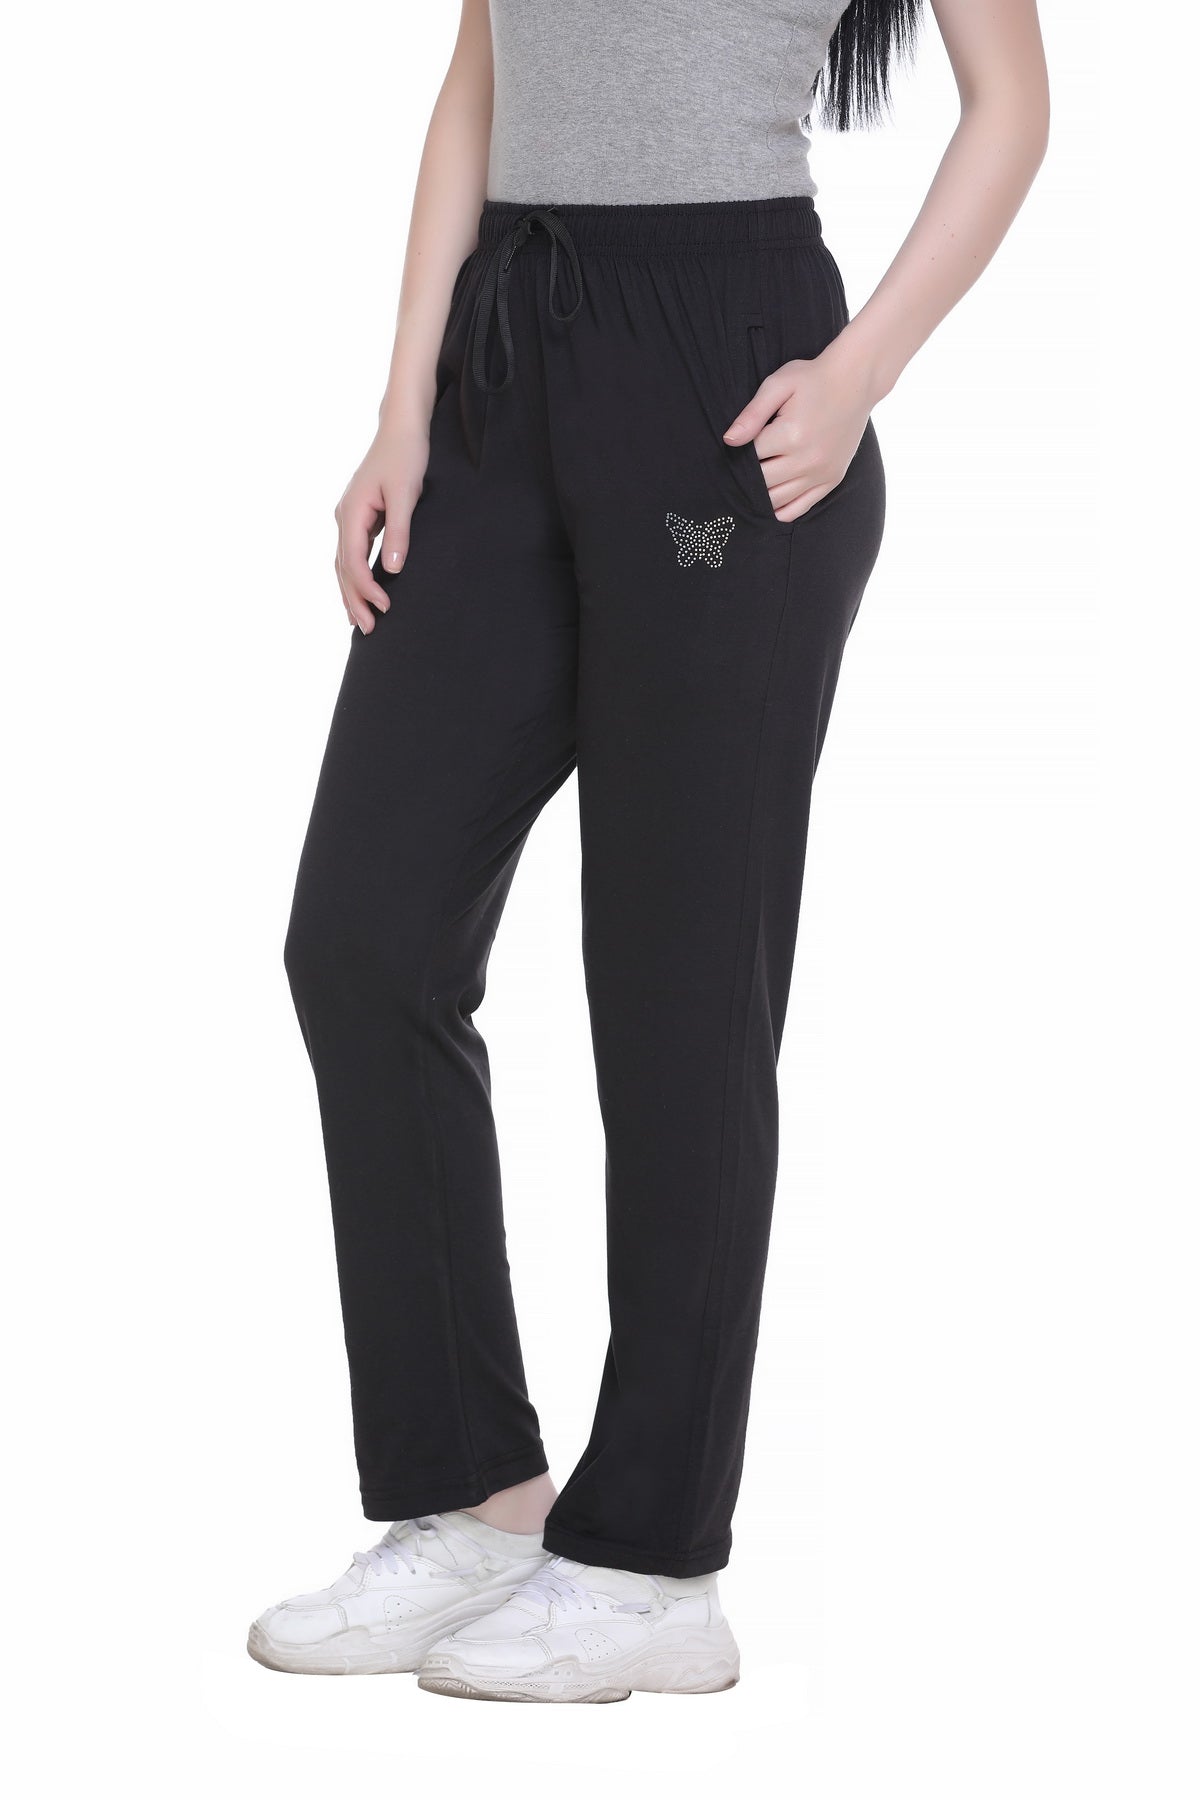 Where can someone find the best women's track pants? - Quora